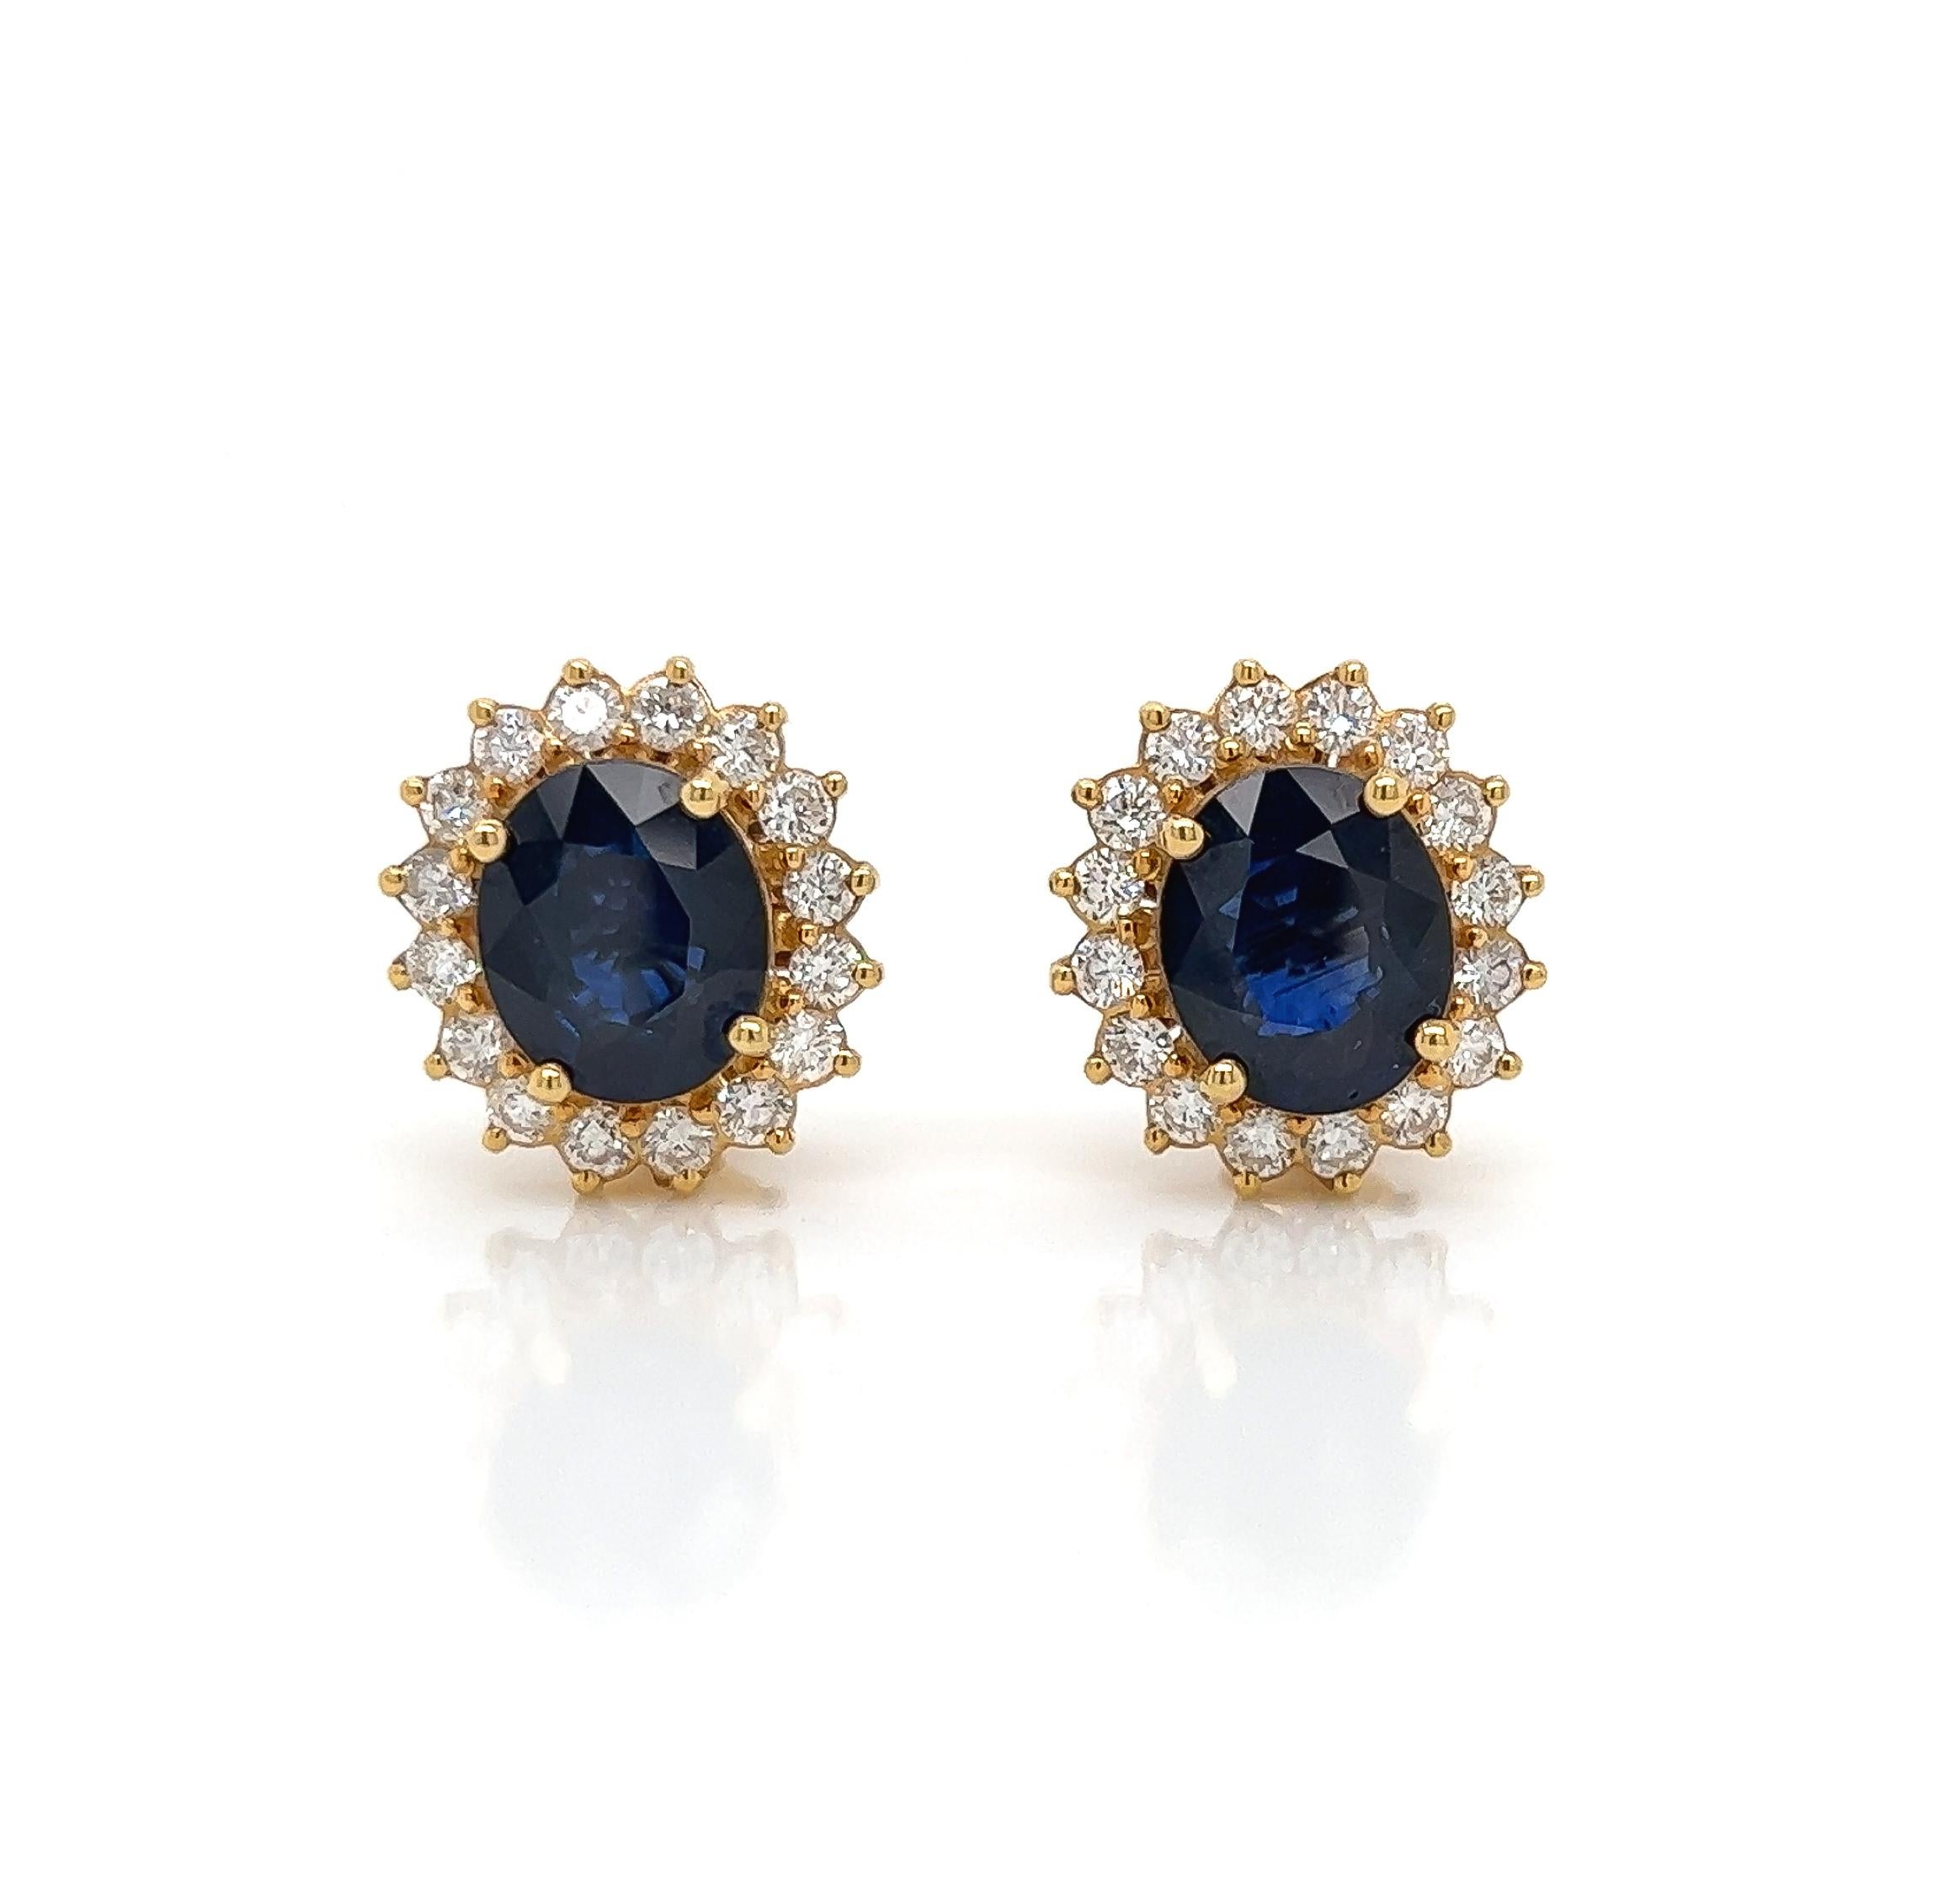 10.63 Total Carat Victorian Style Sapphire and Diamond Earrings in 18K Gold

This gorgeous pair of sapphire earrings are sure to draw all eyes on you. It is created with whopping 8.79 carats of Oval Sapphires, surrounded by a halo of round cut